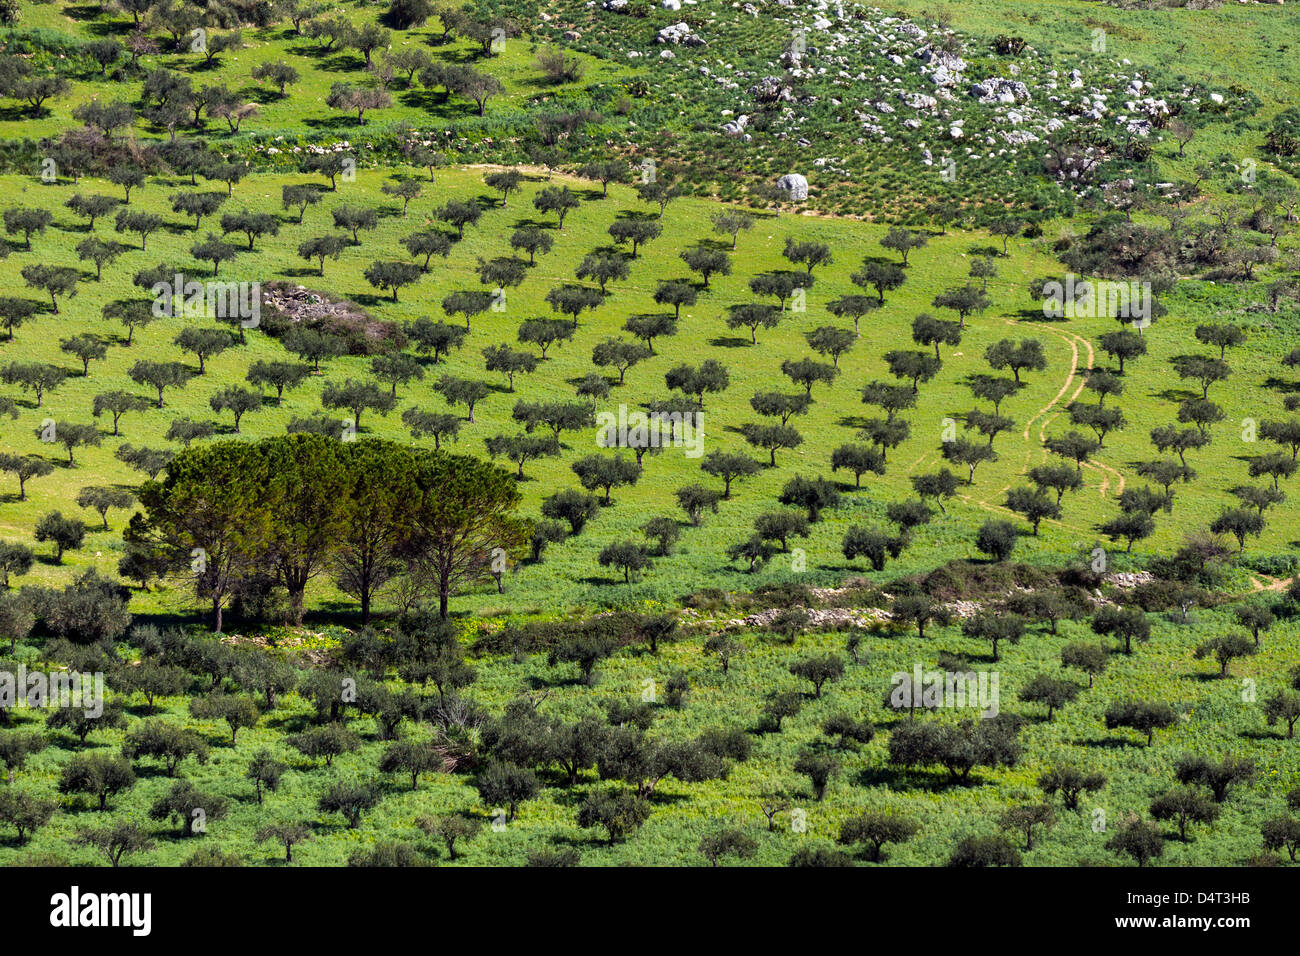 Olive trees in green field, geometric pattern, Sicily, Italy Stock Photo